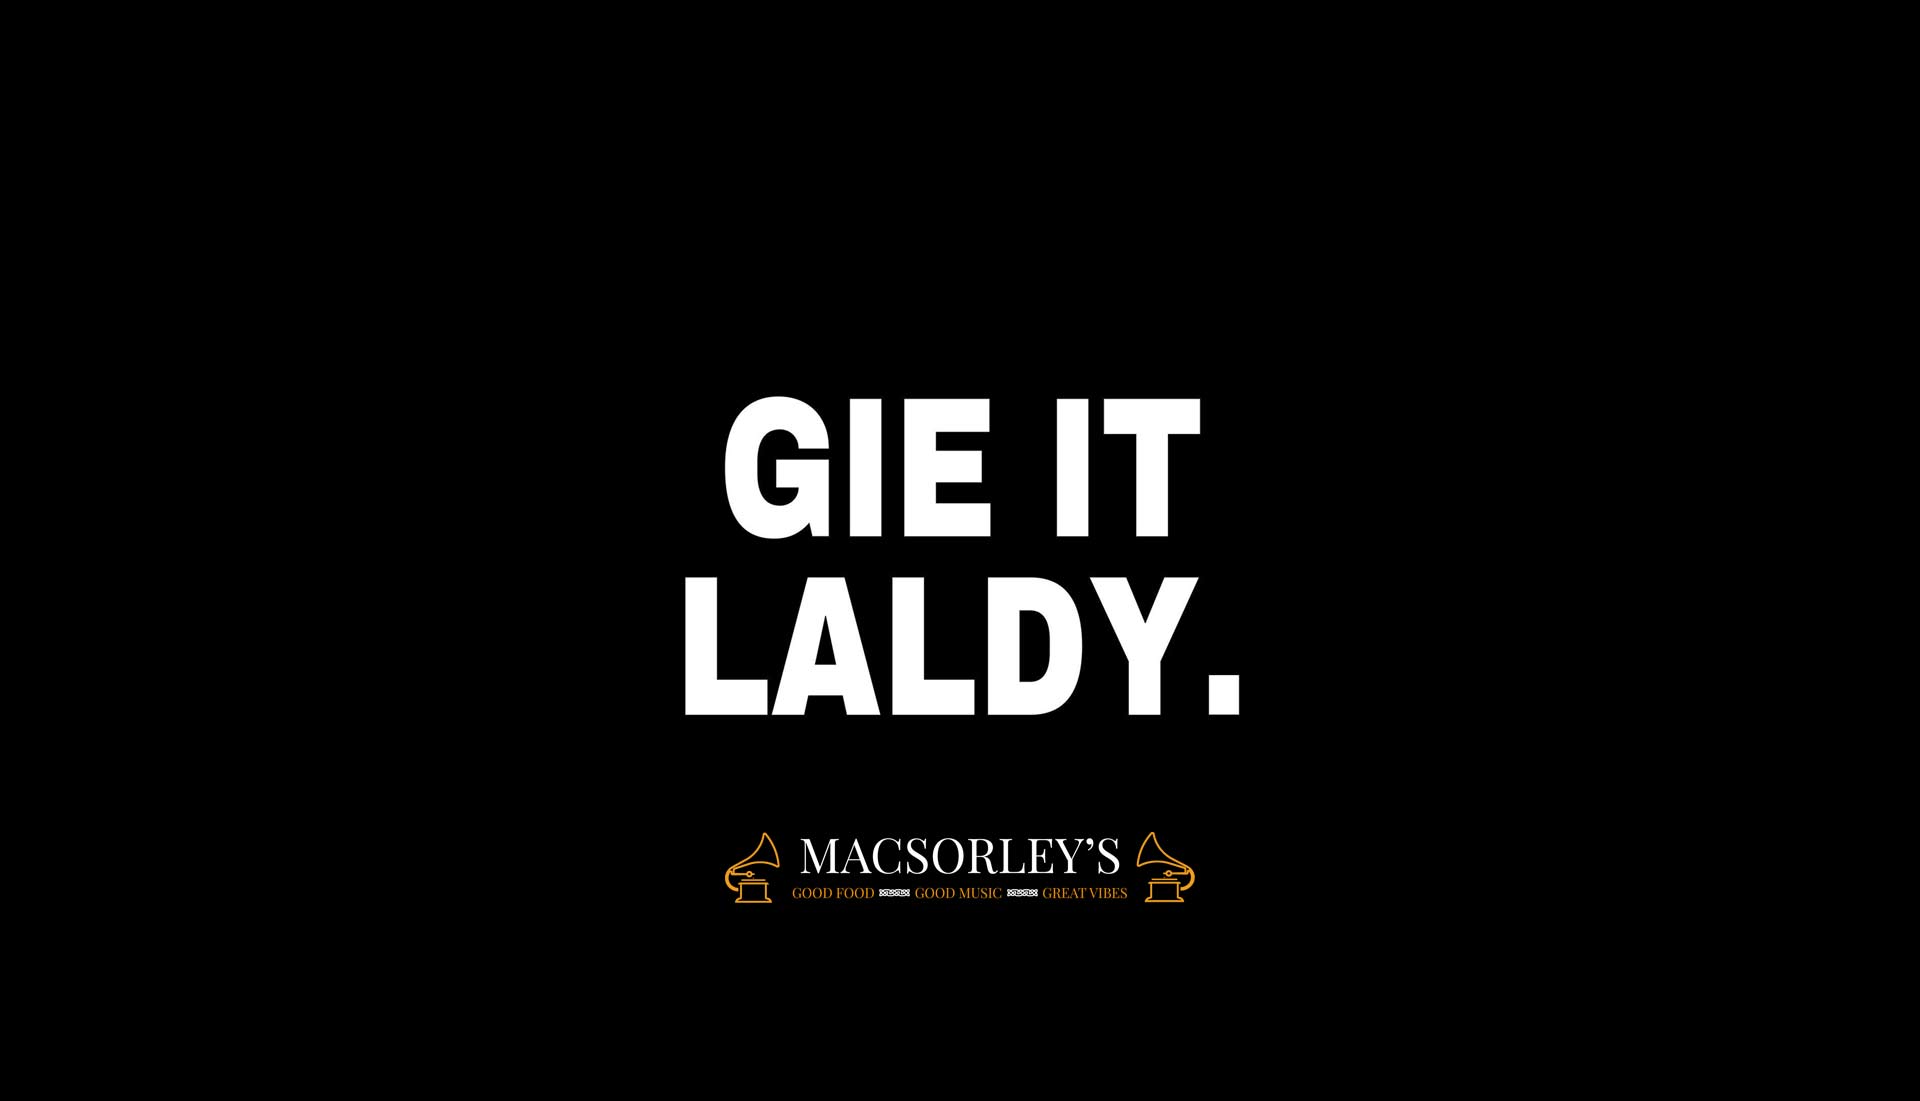 Gie it lady at Macsorley's